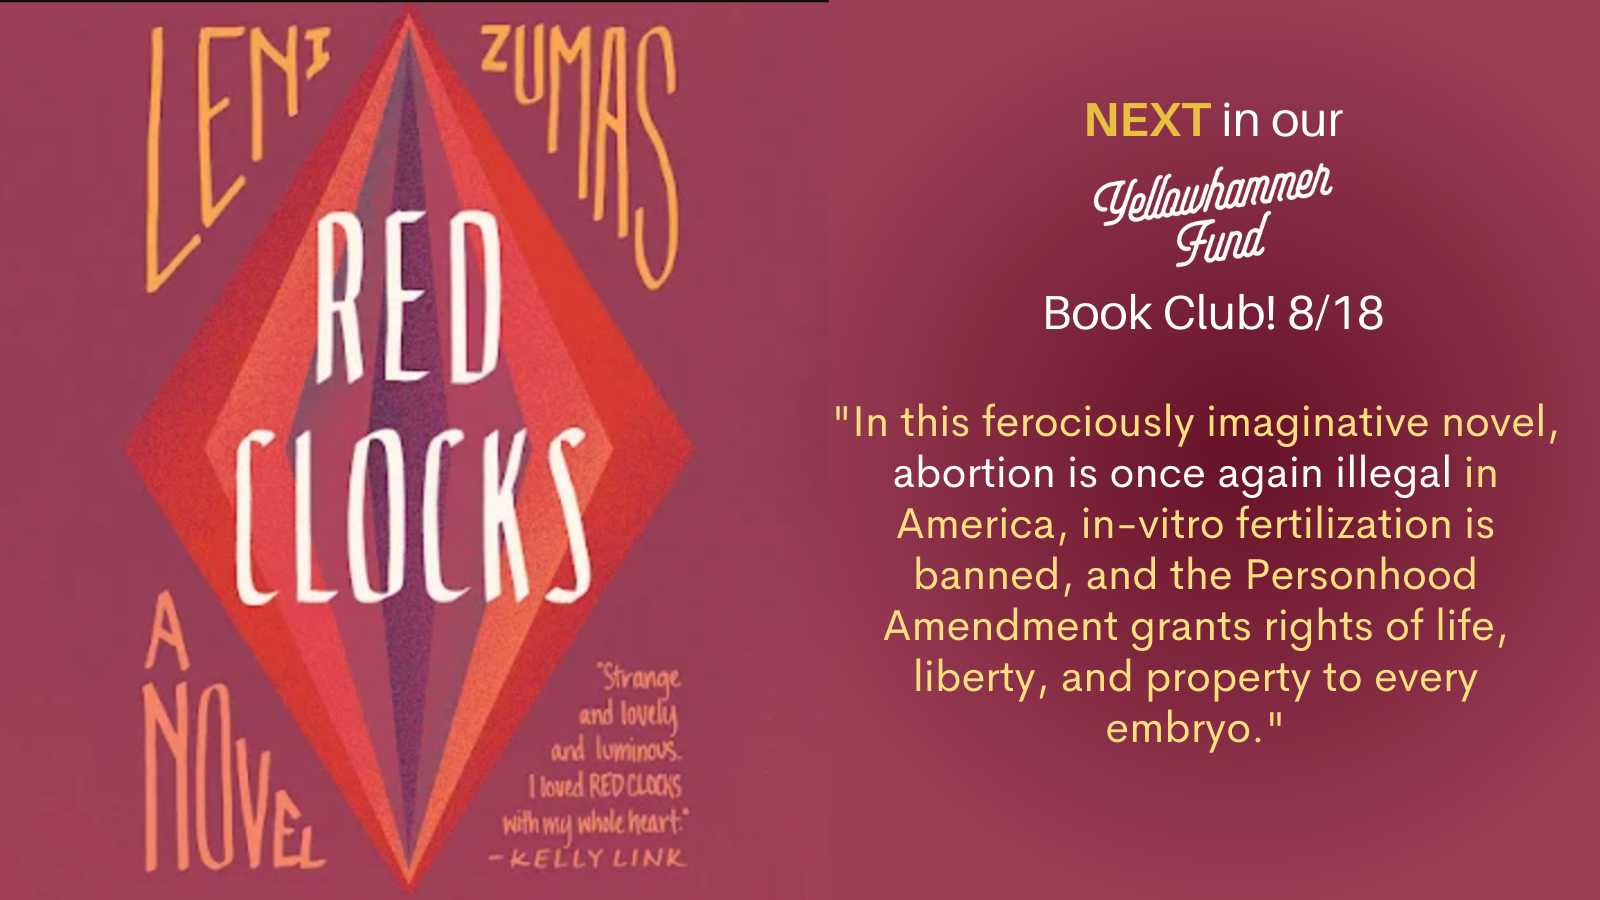 Red Clocks book cover image featuring a short quote